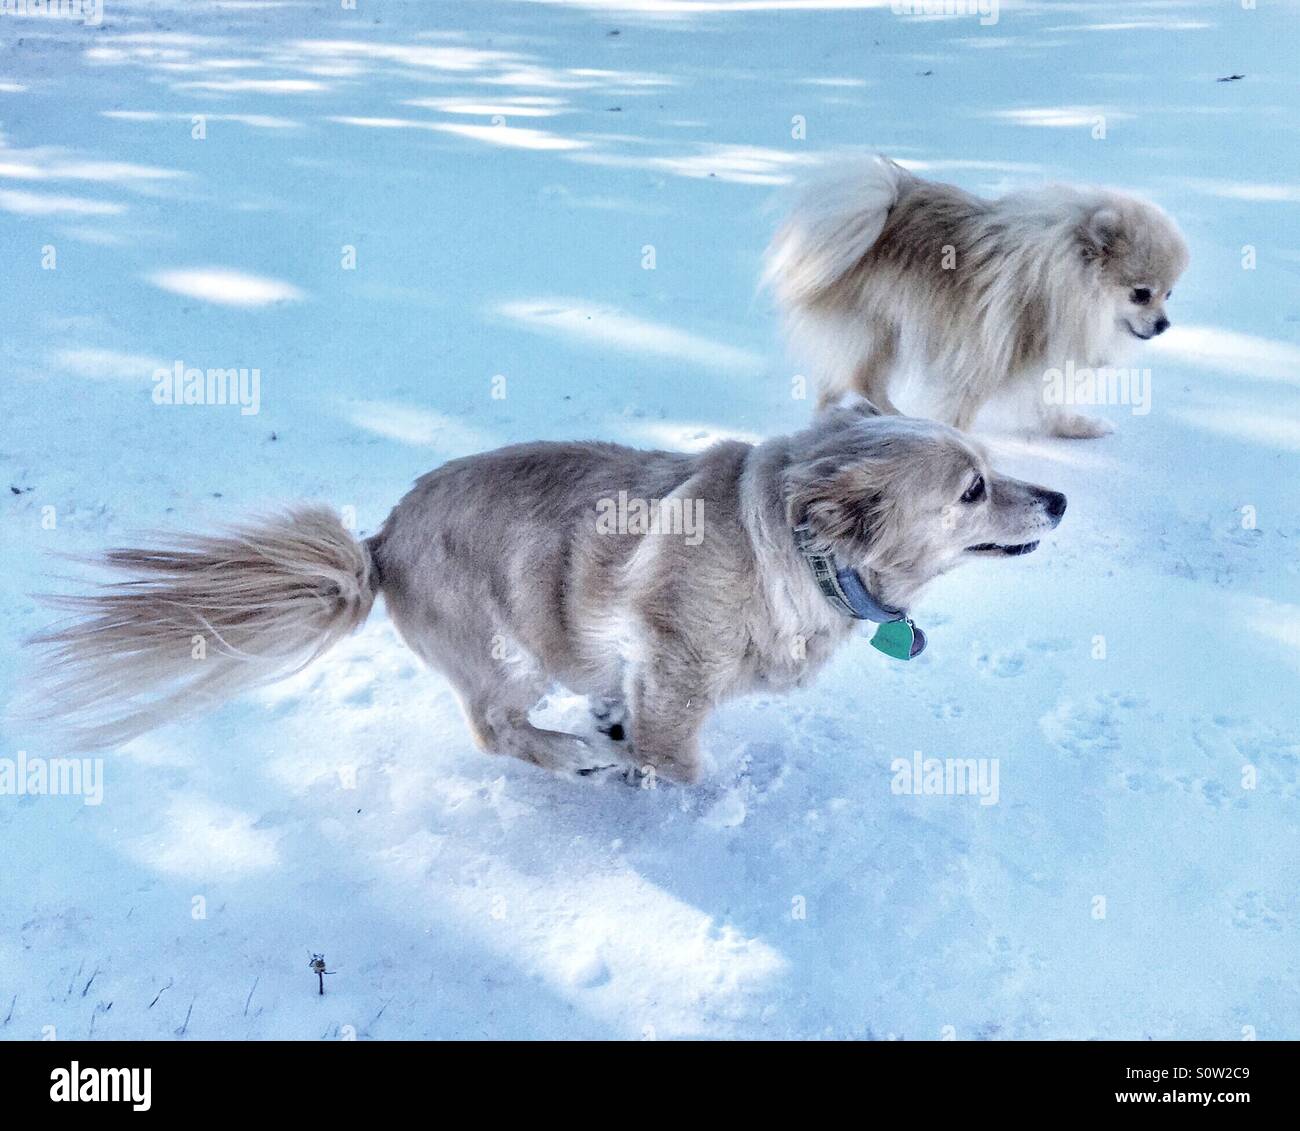 Dog running in the snow Stock Photo